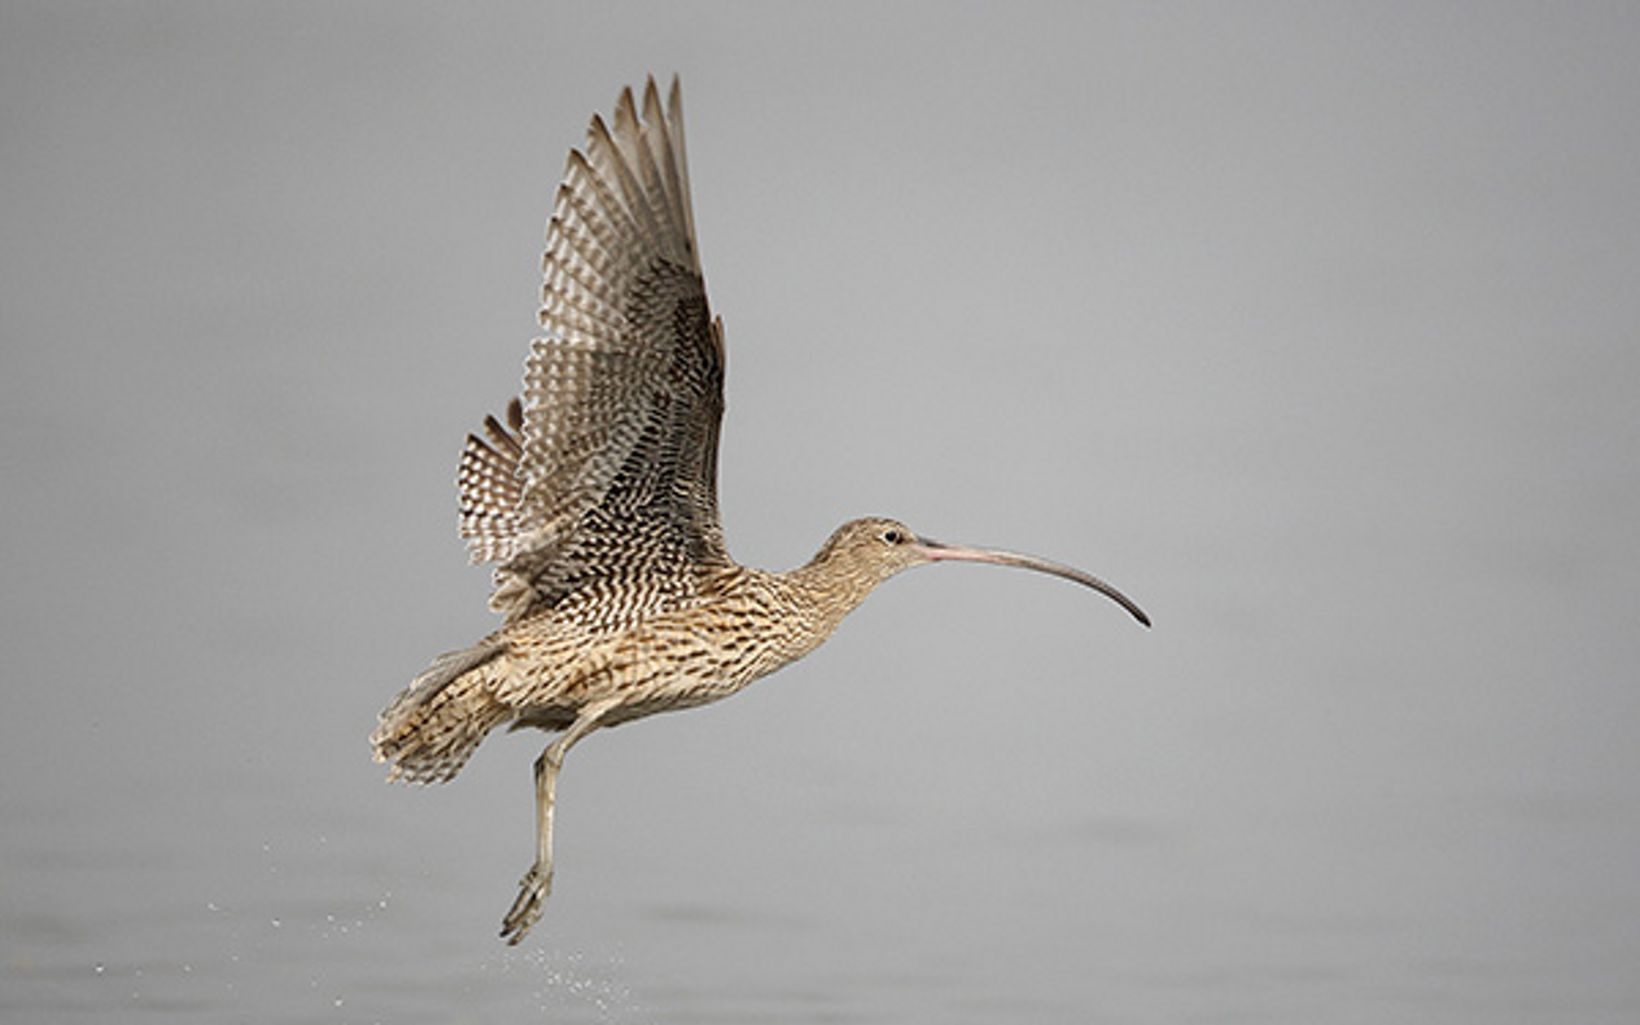 Eastern Curlew The largest of all the world’s shorebirds, the Eastern Curlew’s impressive bill is used to probe mud and dig up crabs and molluscs. © Martin Hale